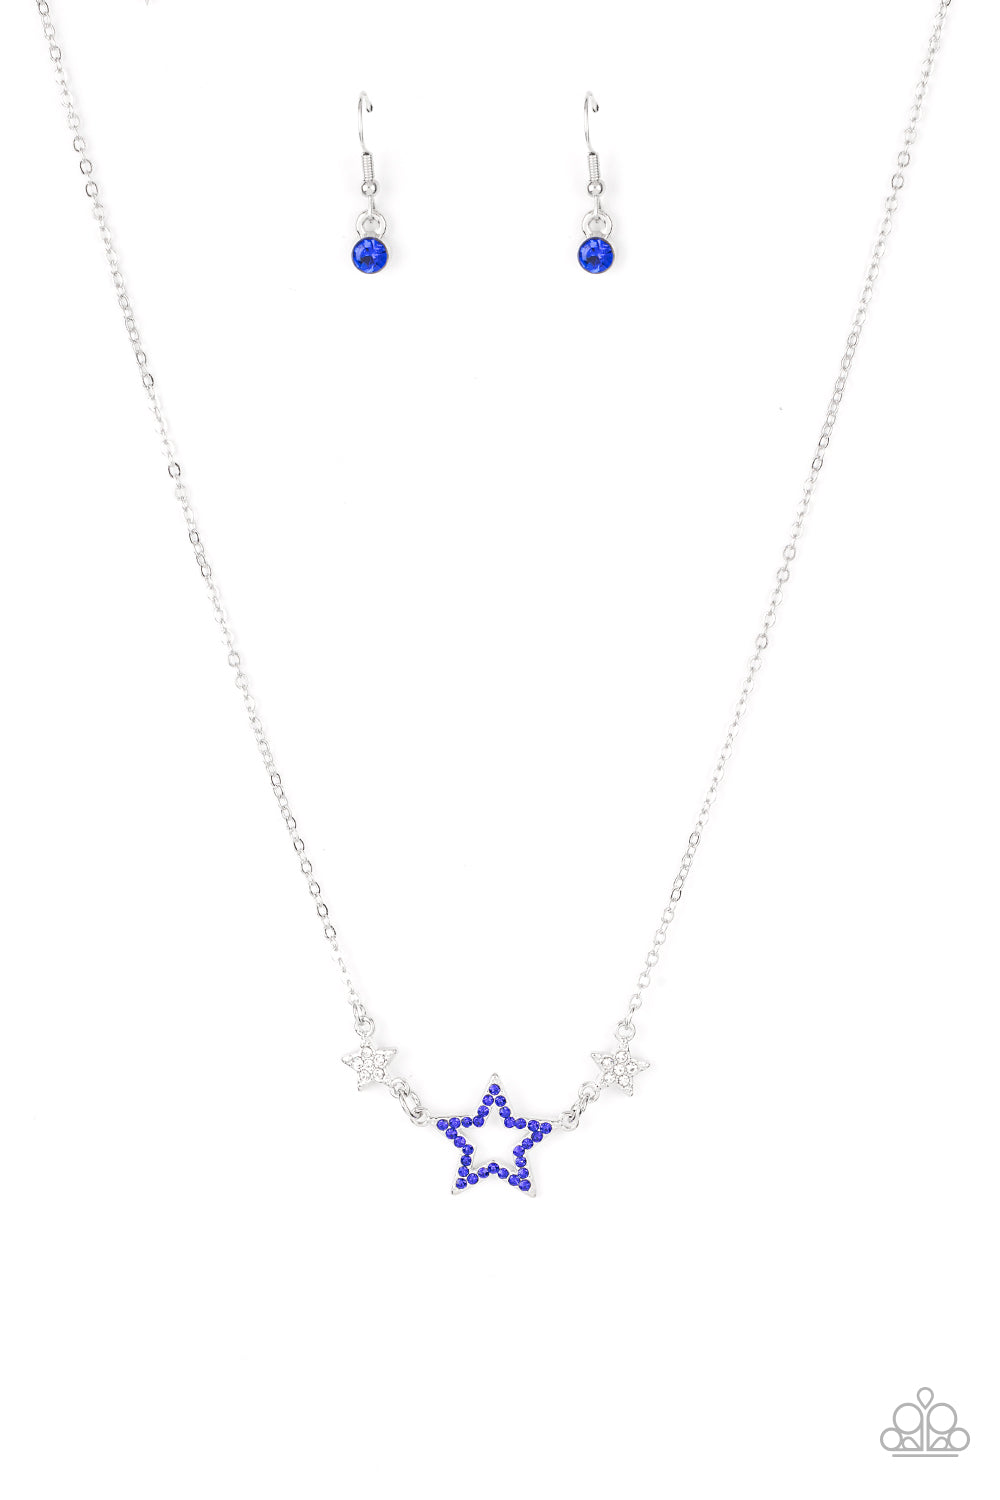 five-dollar-jewelry-united-we-sparkle-blue-necklace-paparazzi-accessories